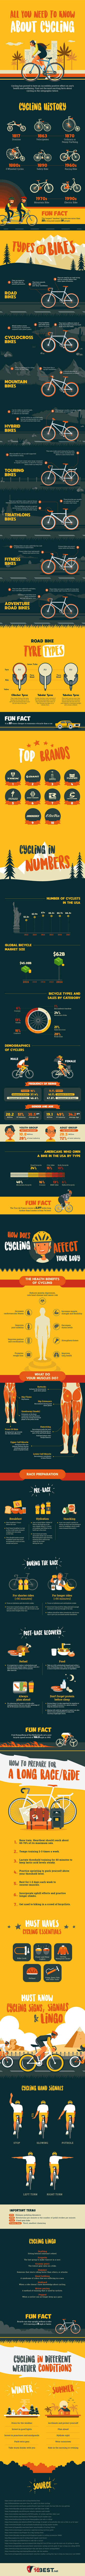 Cycling Infographic